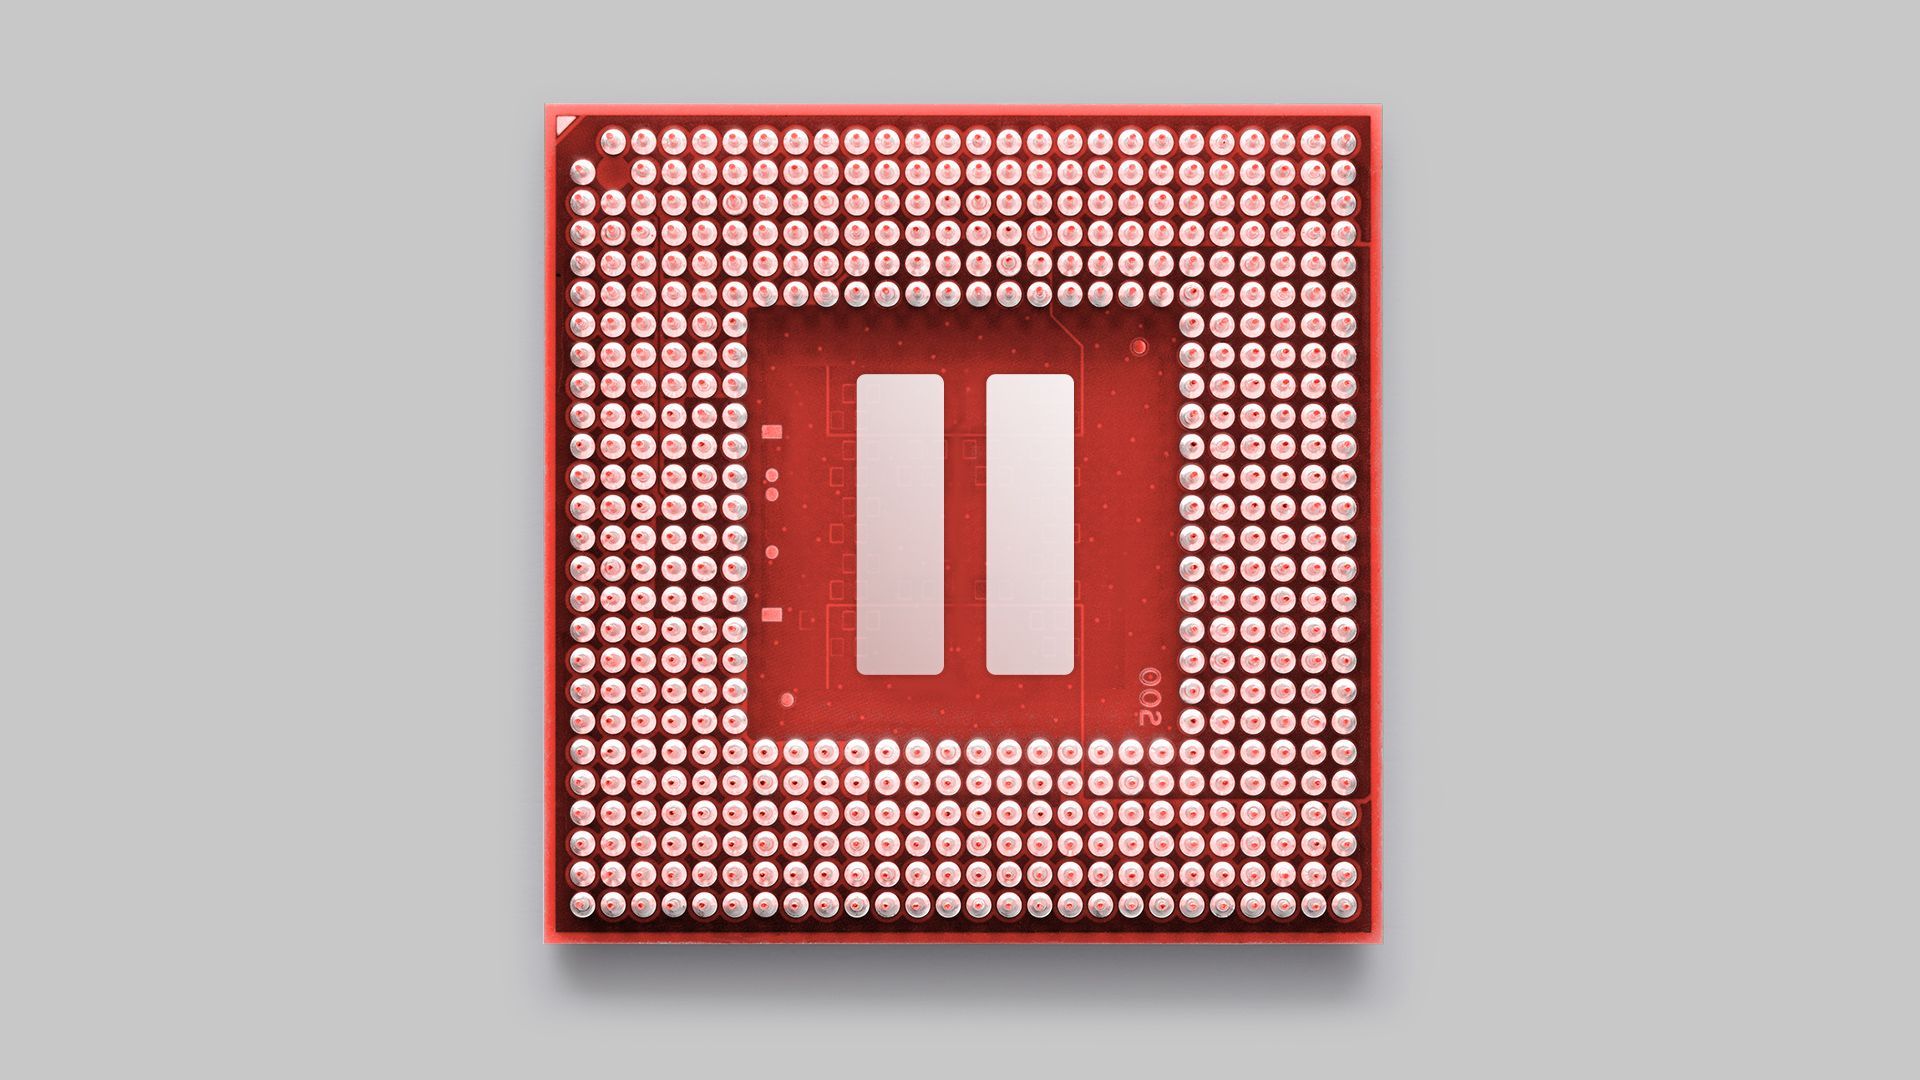 Illustration of a computer chip with a pause button in the center.  